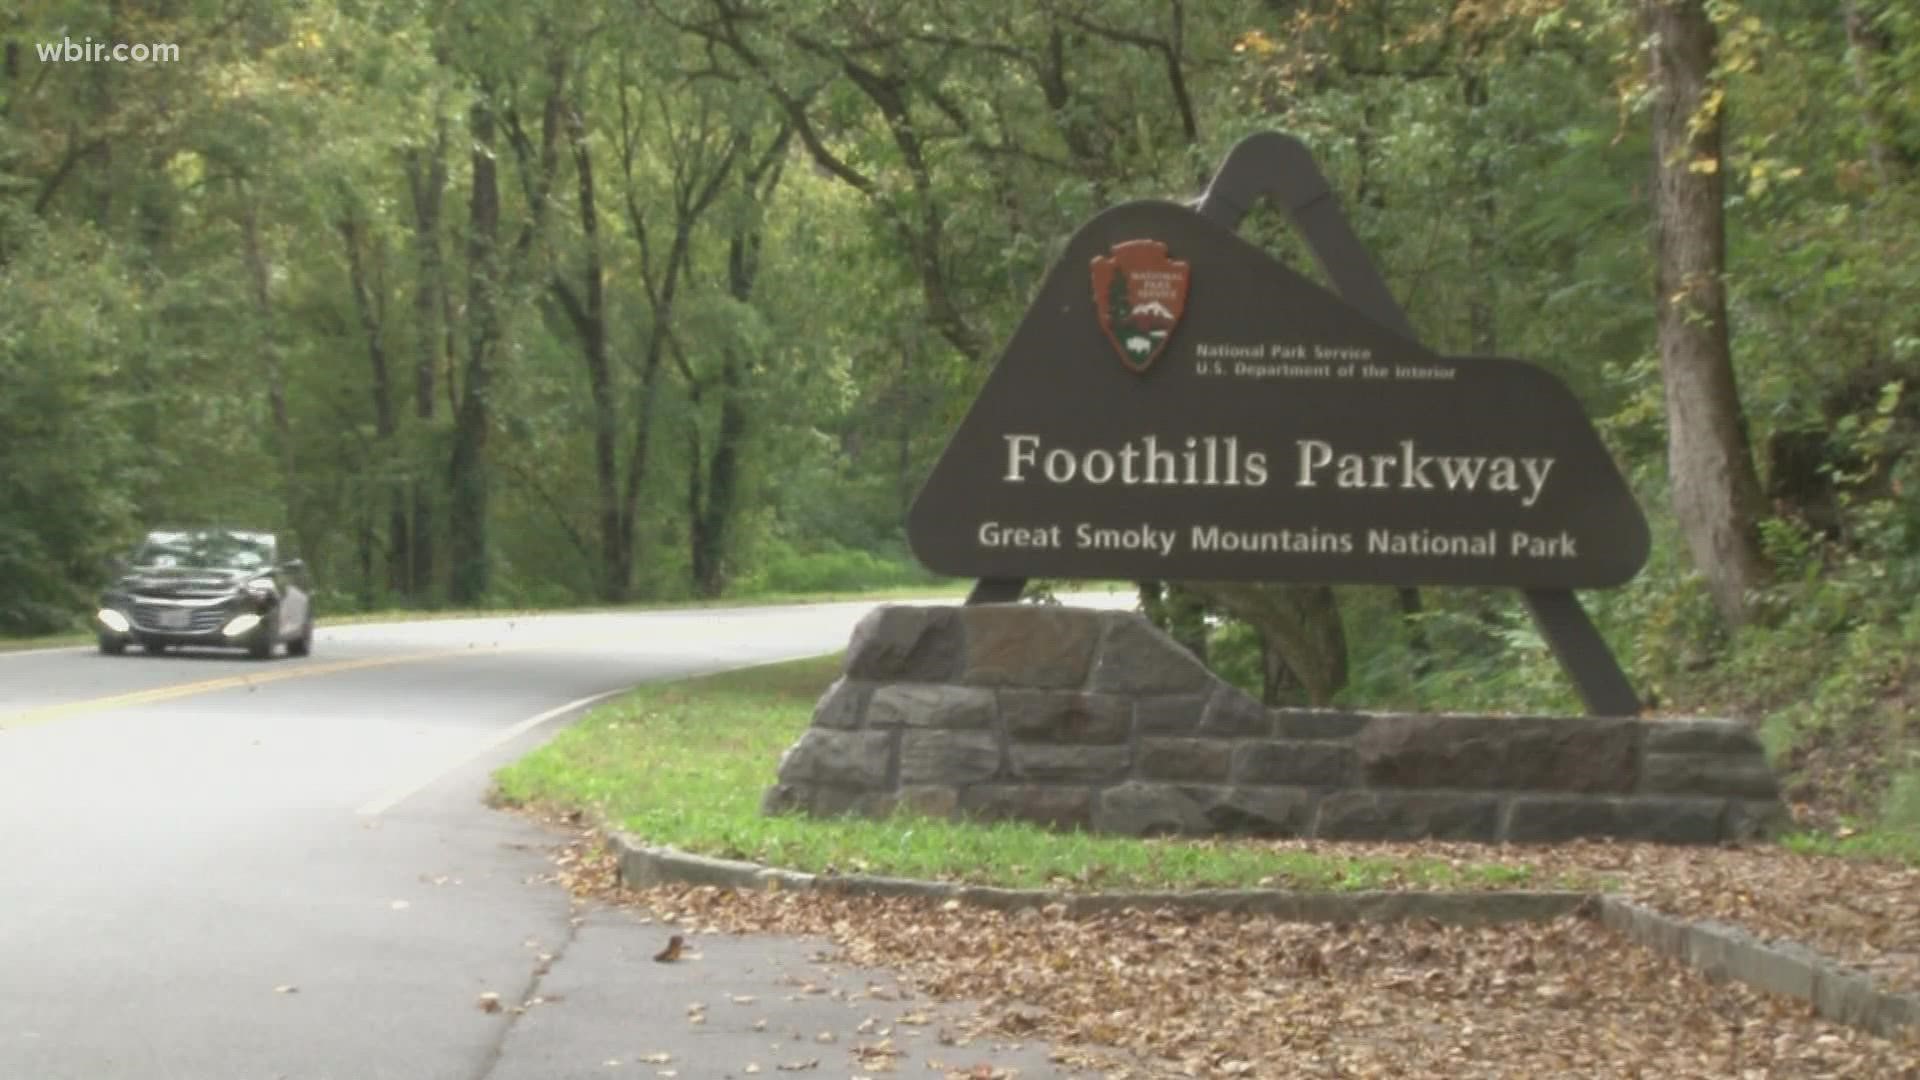 The new proposed Foothills Parkway section, 8D, would extend the parkway for 9.8 miles from Wears Valley to the Spur near Gatlinburg and Pigeon Forge.